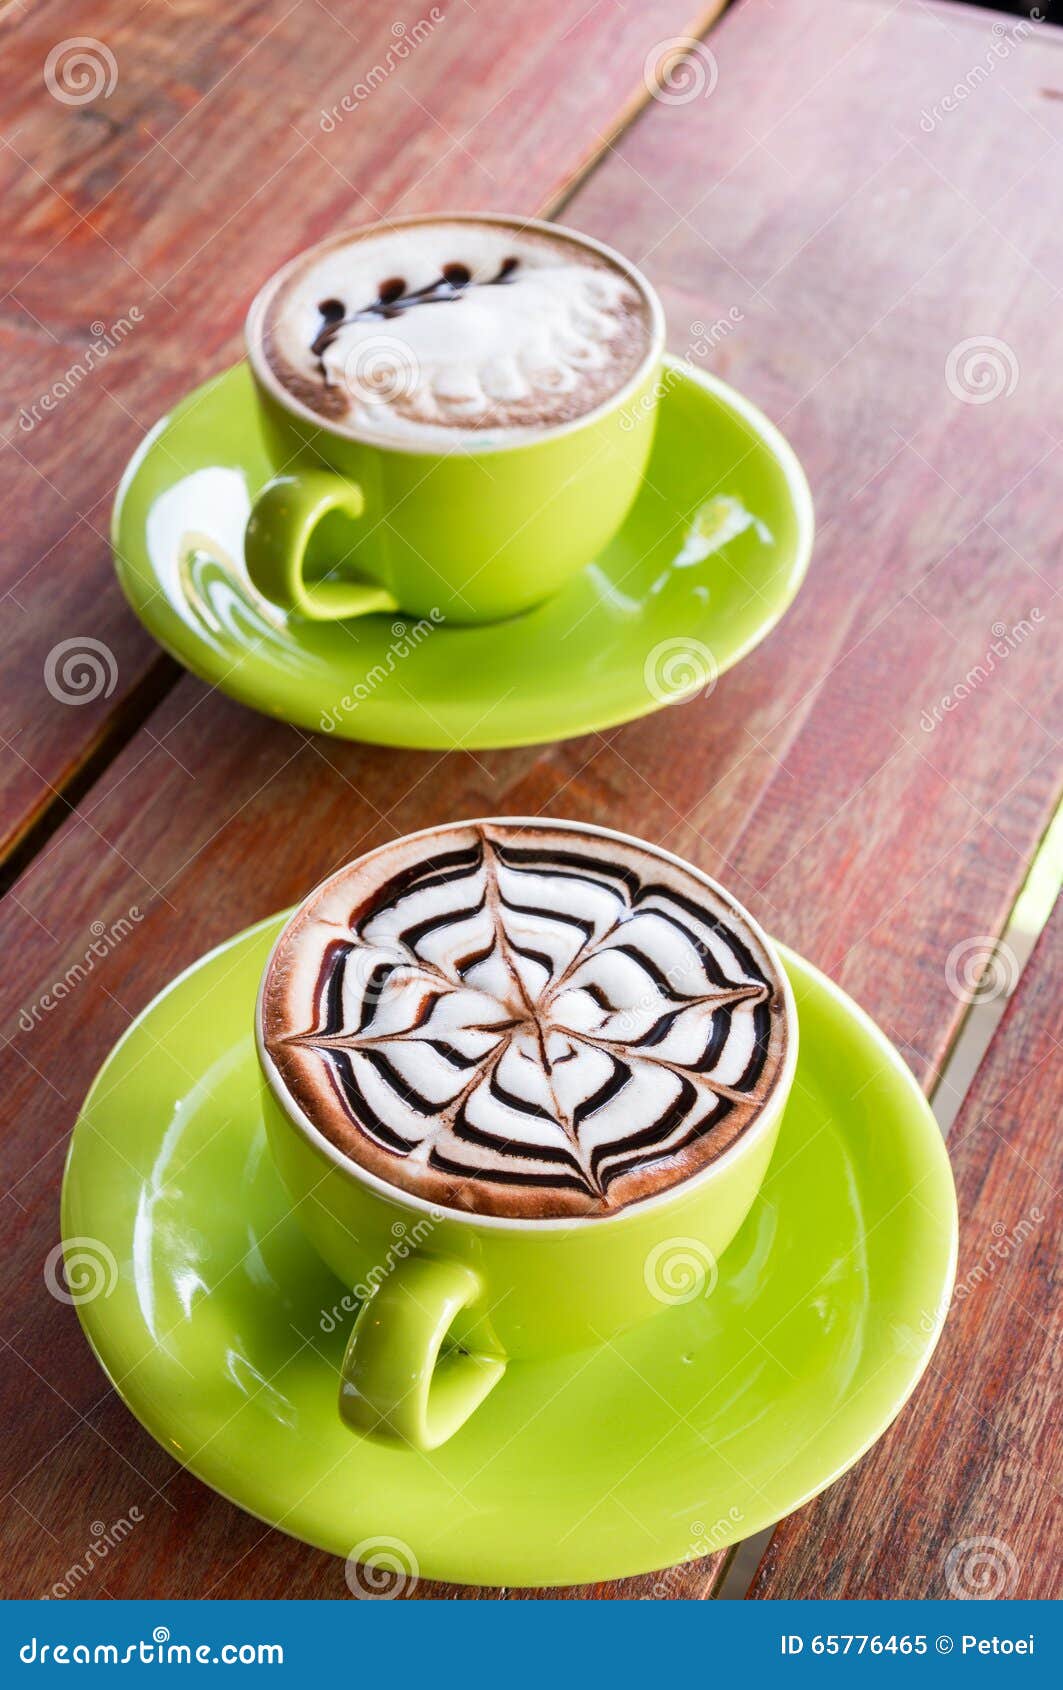 Cafe mocca and cafe latte stock image. Image of glass - 65776465